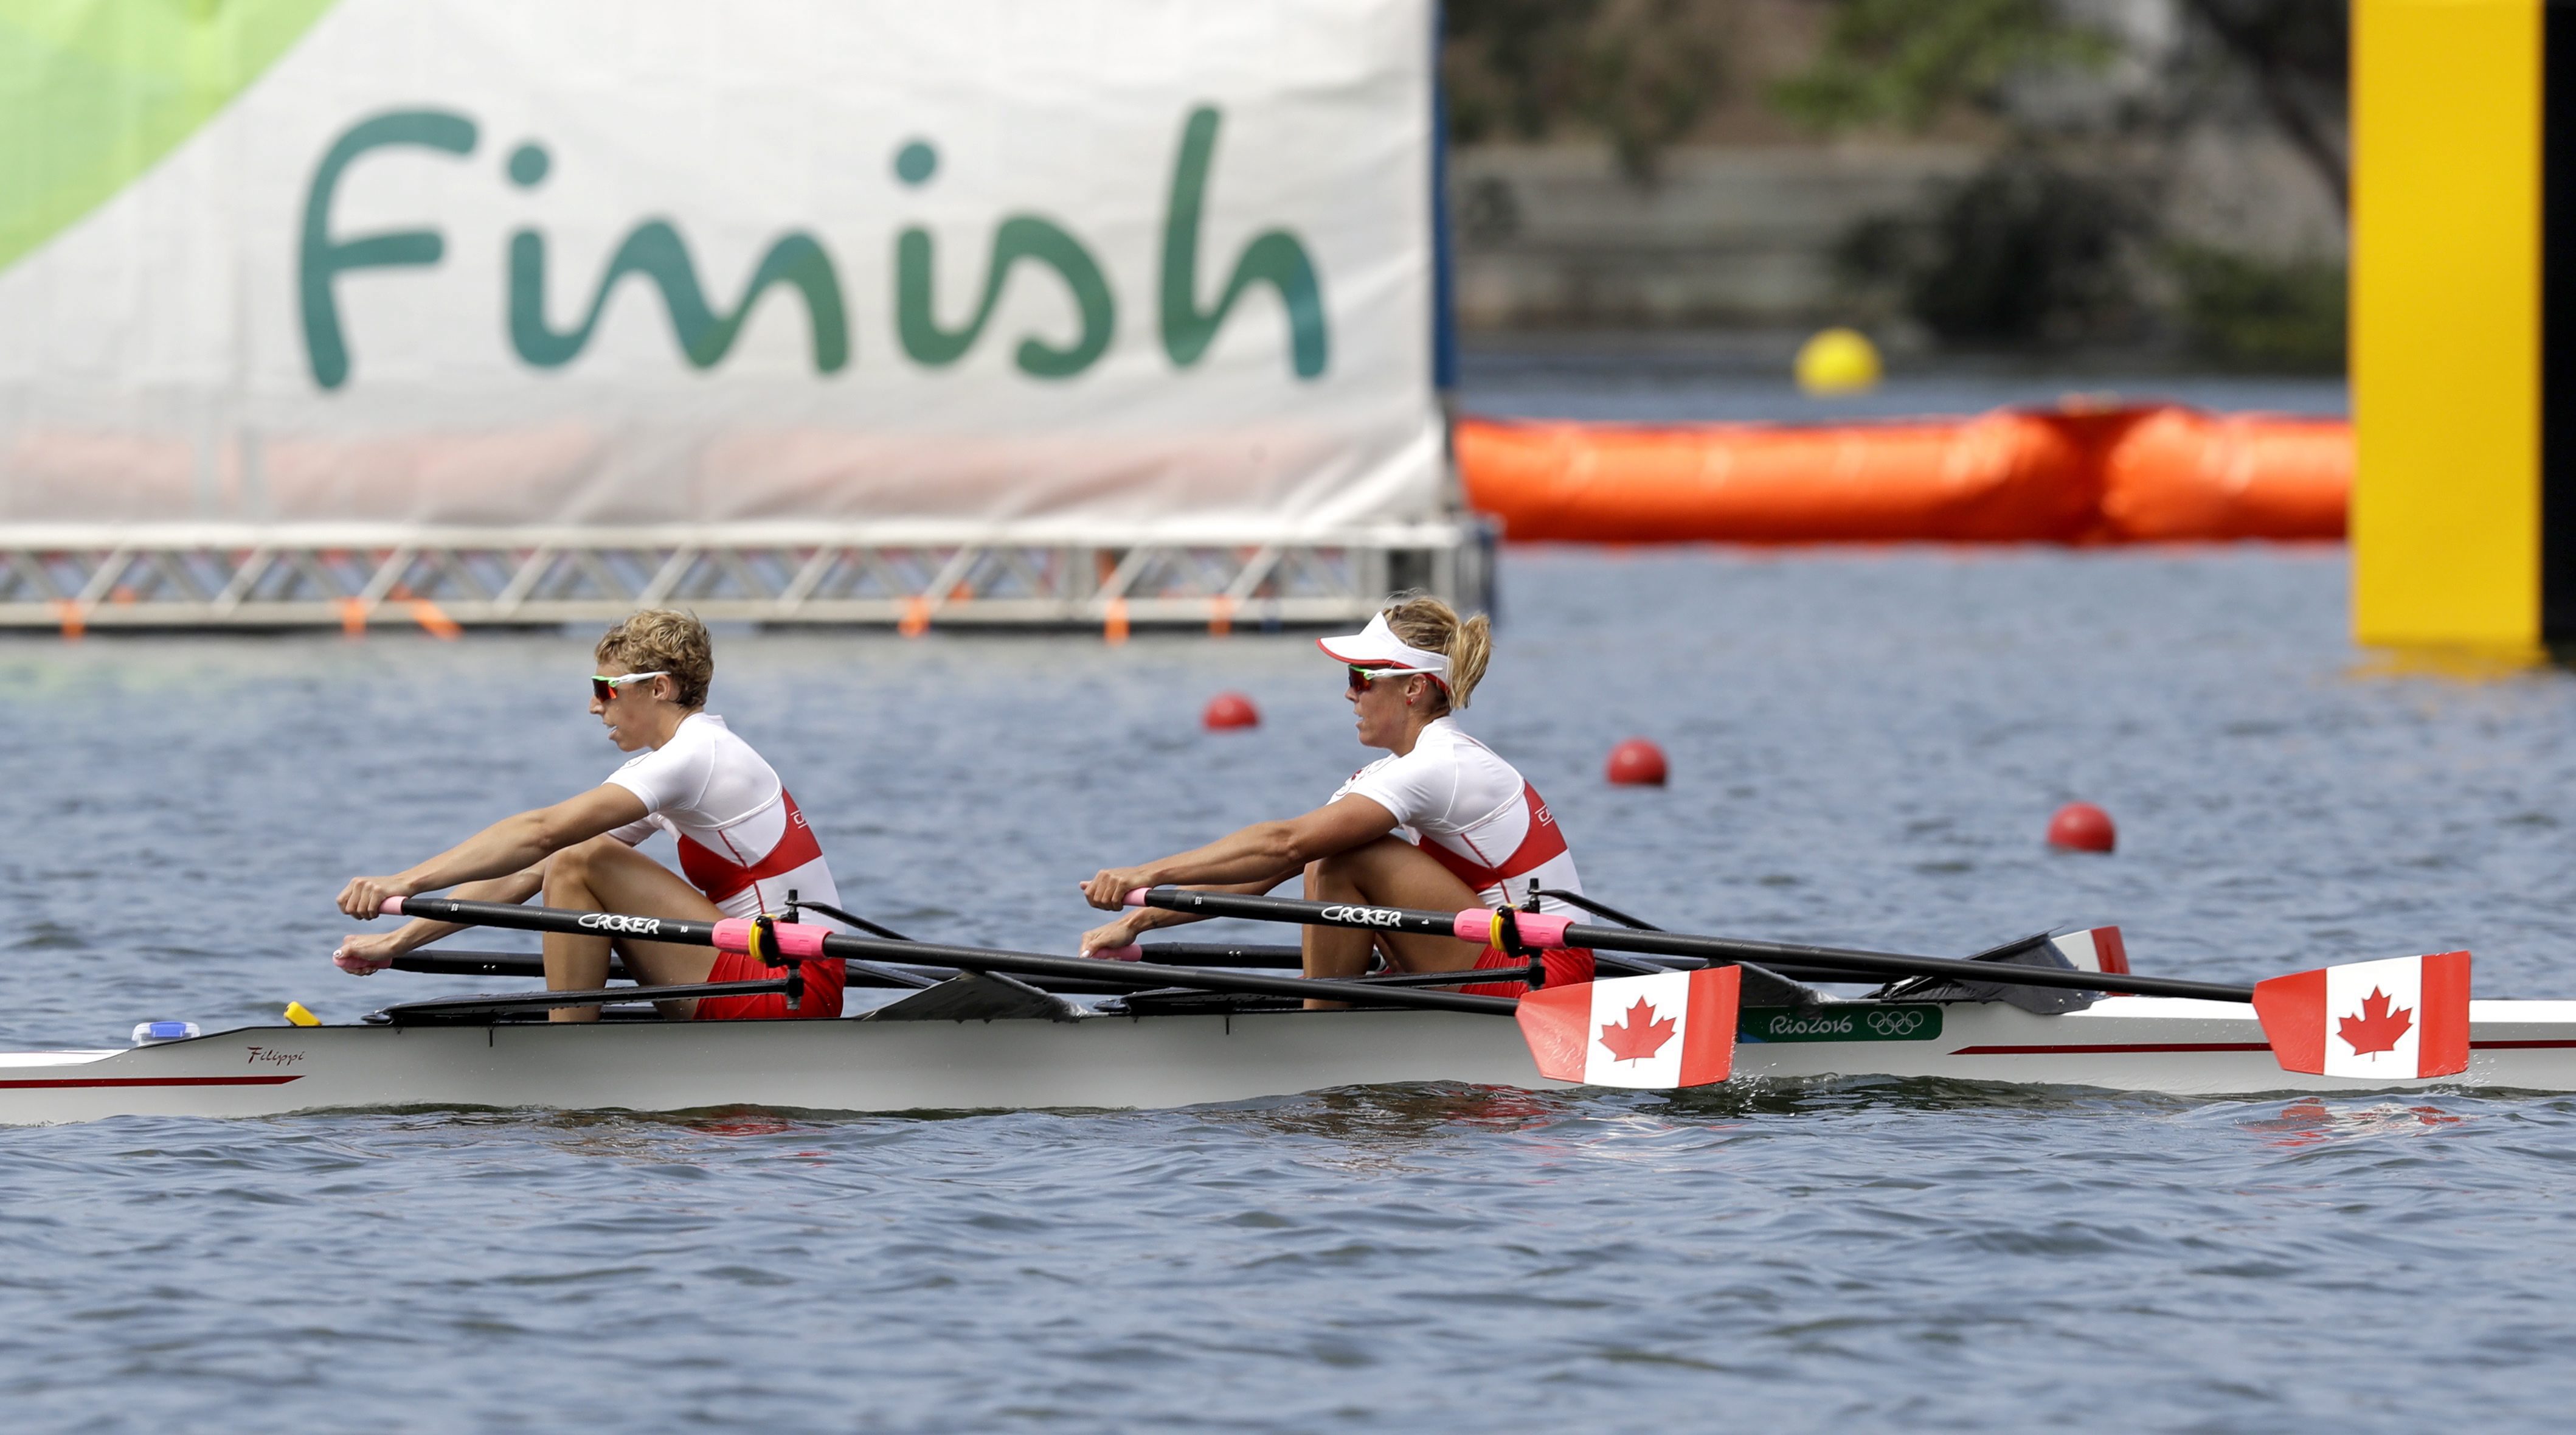 Lindsay Jennerich and Patricia Obee of Canada, compete in the women's rowing lightweight double sculls heat during the 2016 Summer Olympics in Rio de Janeiro, Brazil, Monday, Aug. 8, 2016. (AP Photo/Luca Bruno)